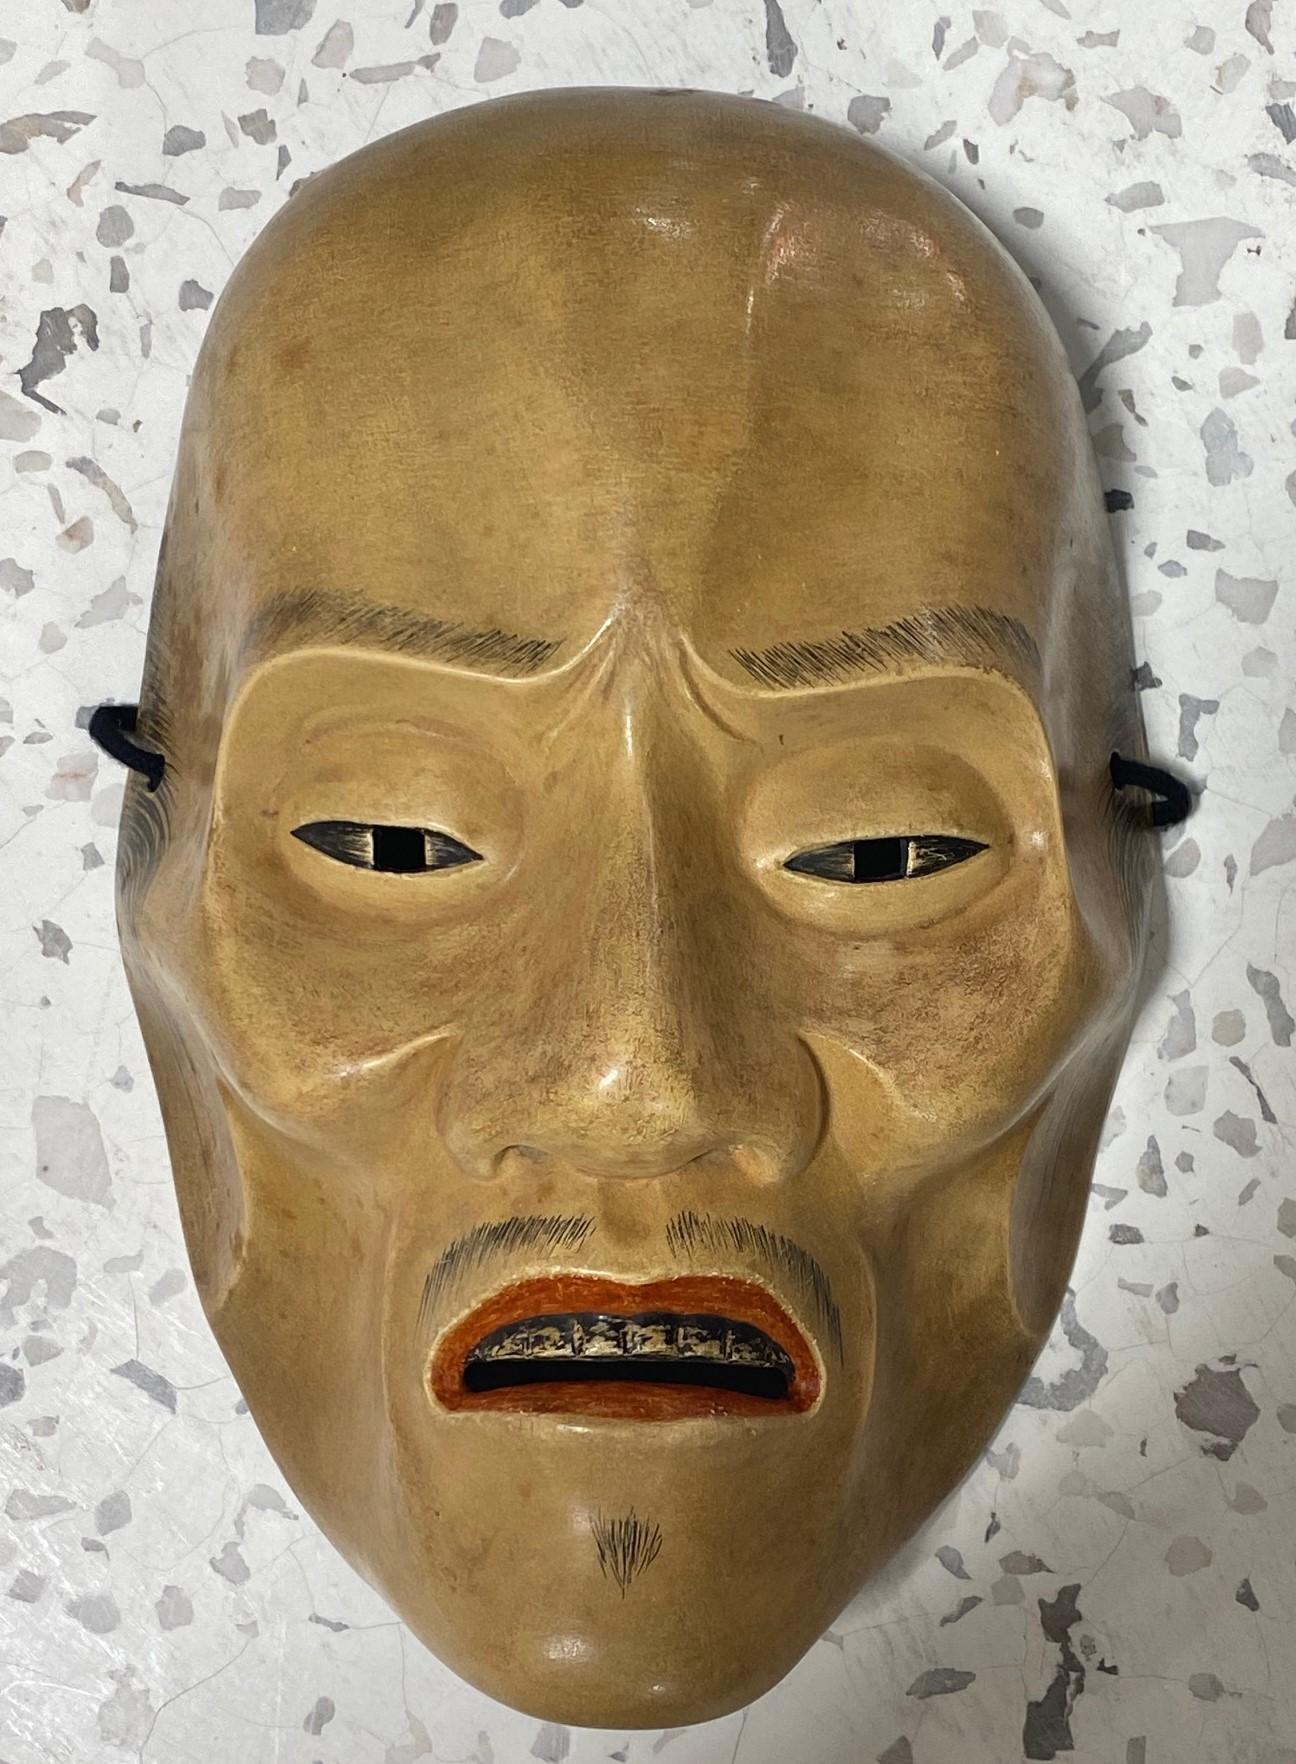 A beautifully carved, wonderfully crafted, highly engaging mask made for Japanese Noh theatre.

The mask is handcrafted and hand carved from natural cypress wood clearly by a master of his Craft (the Japanese artifacts collector we acquired this